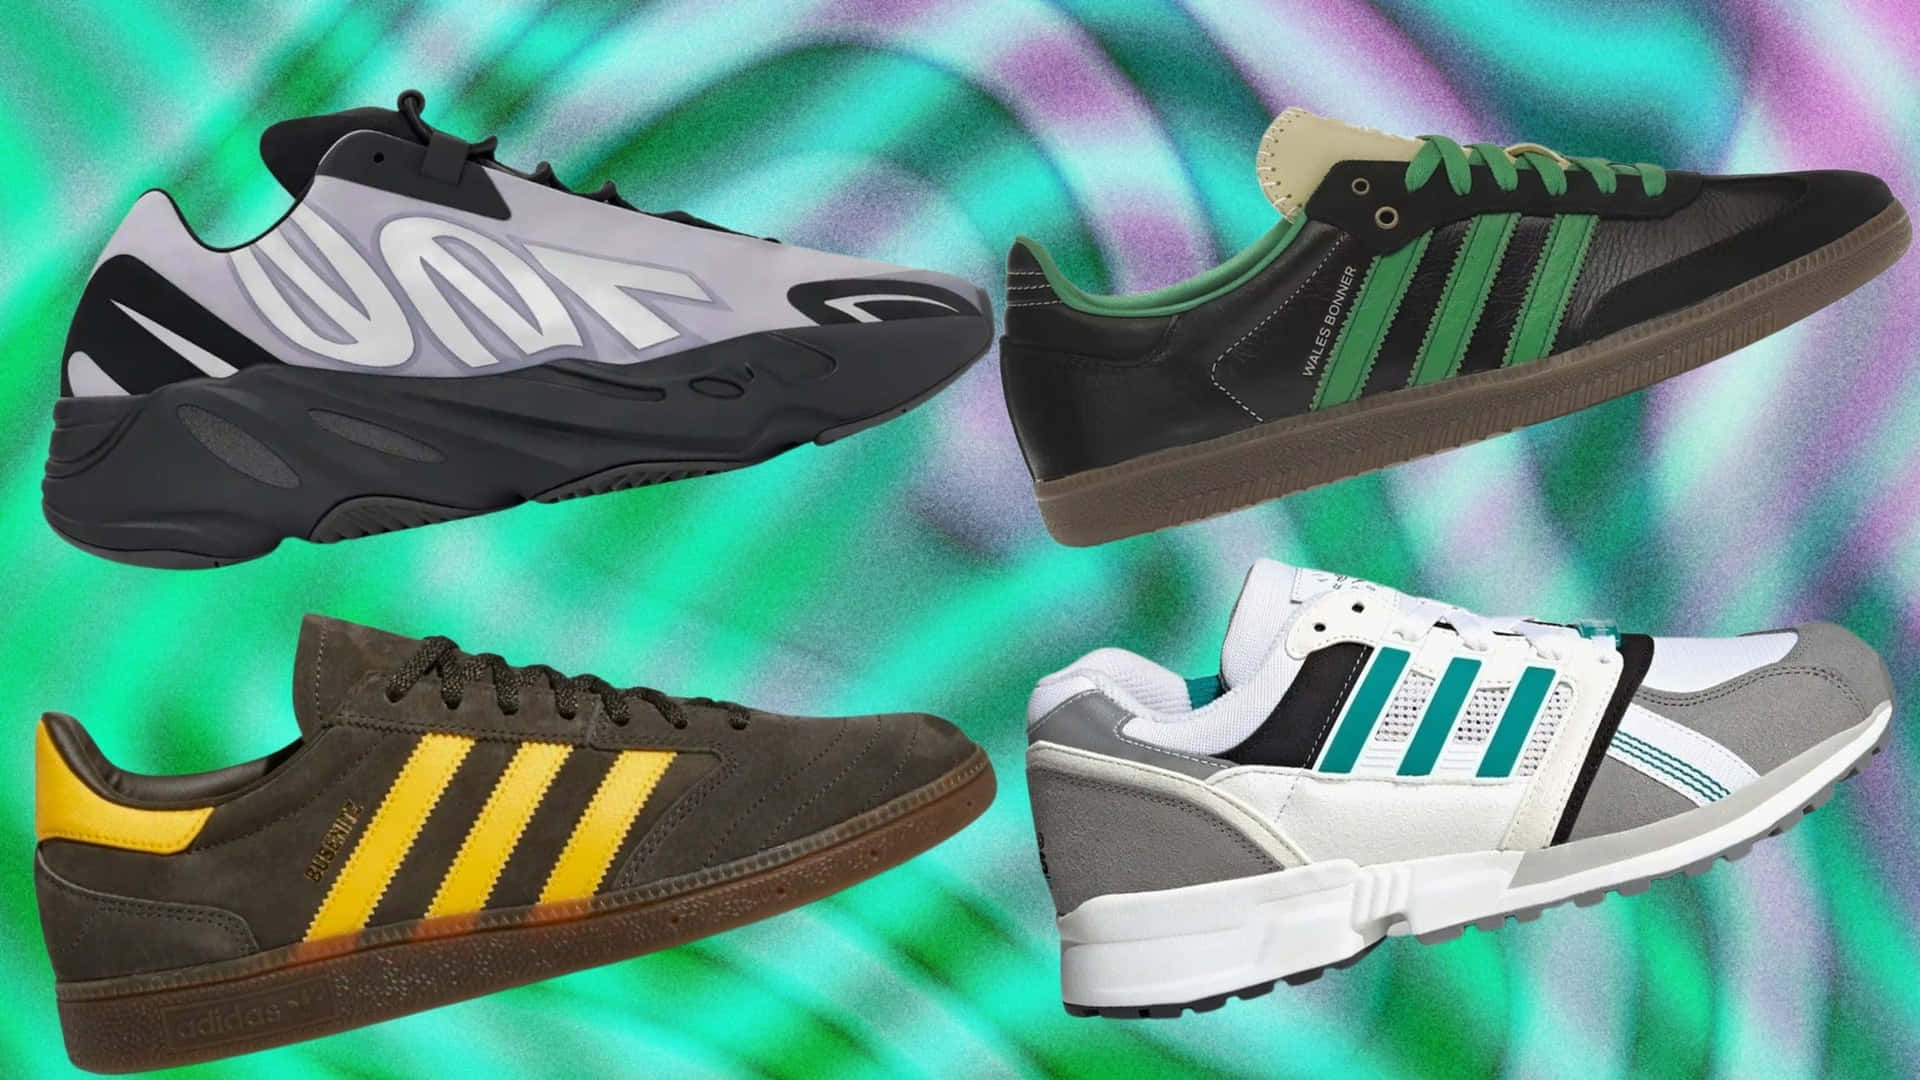 Step up your game and stand out with Adidas.